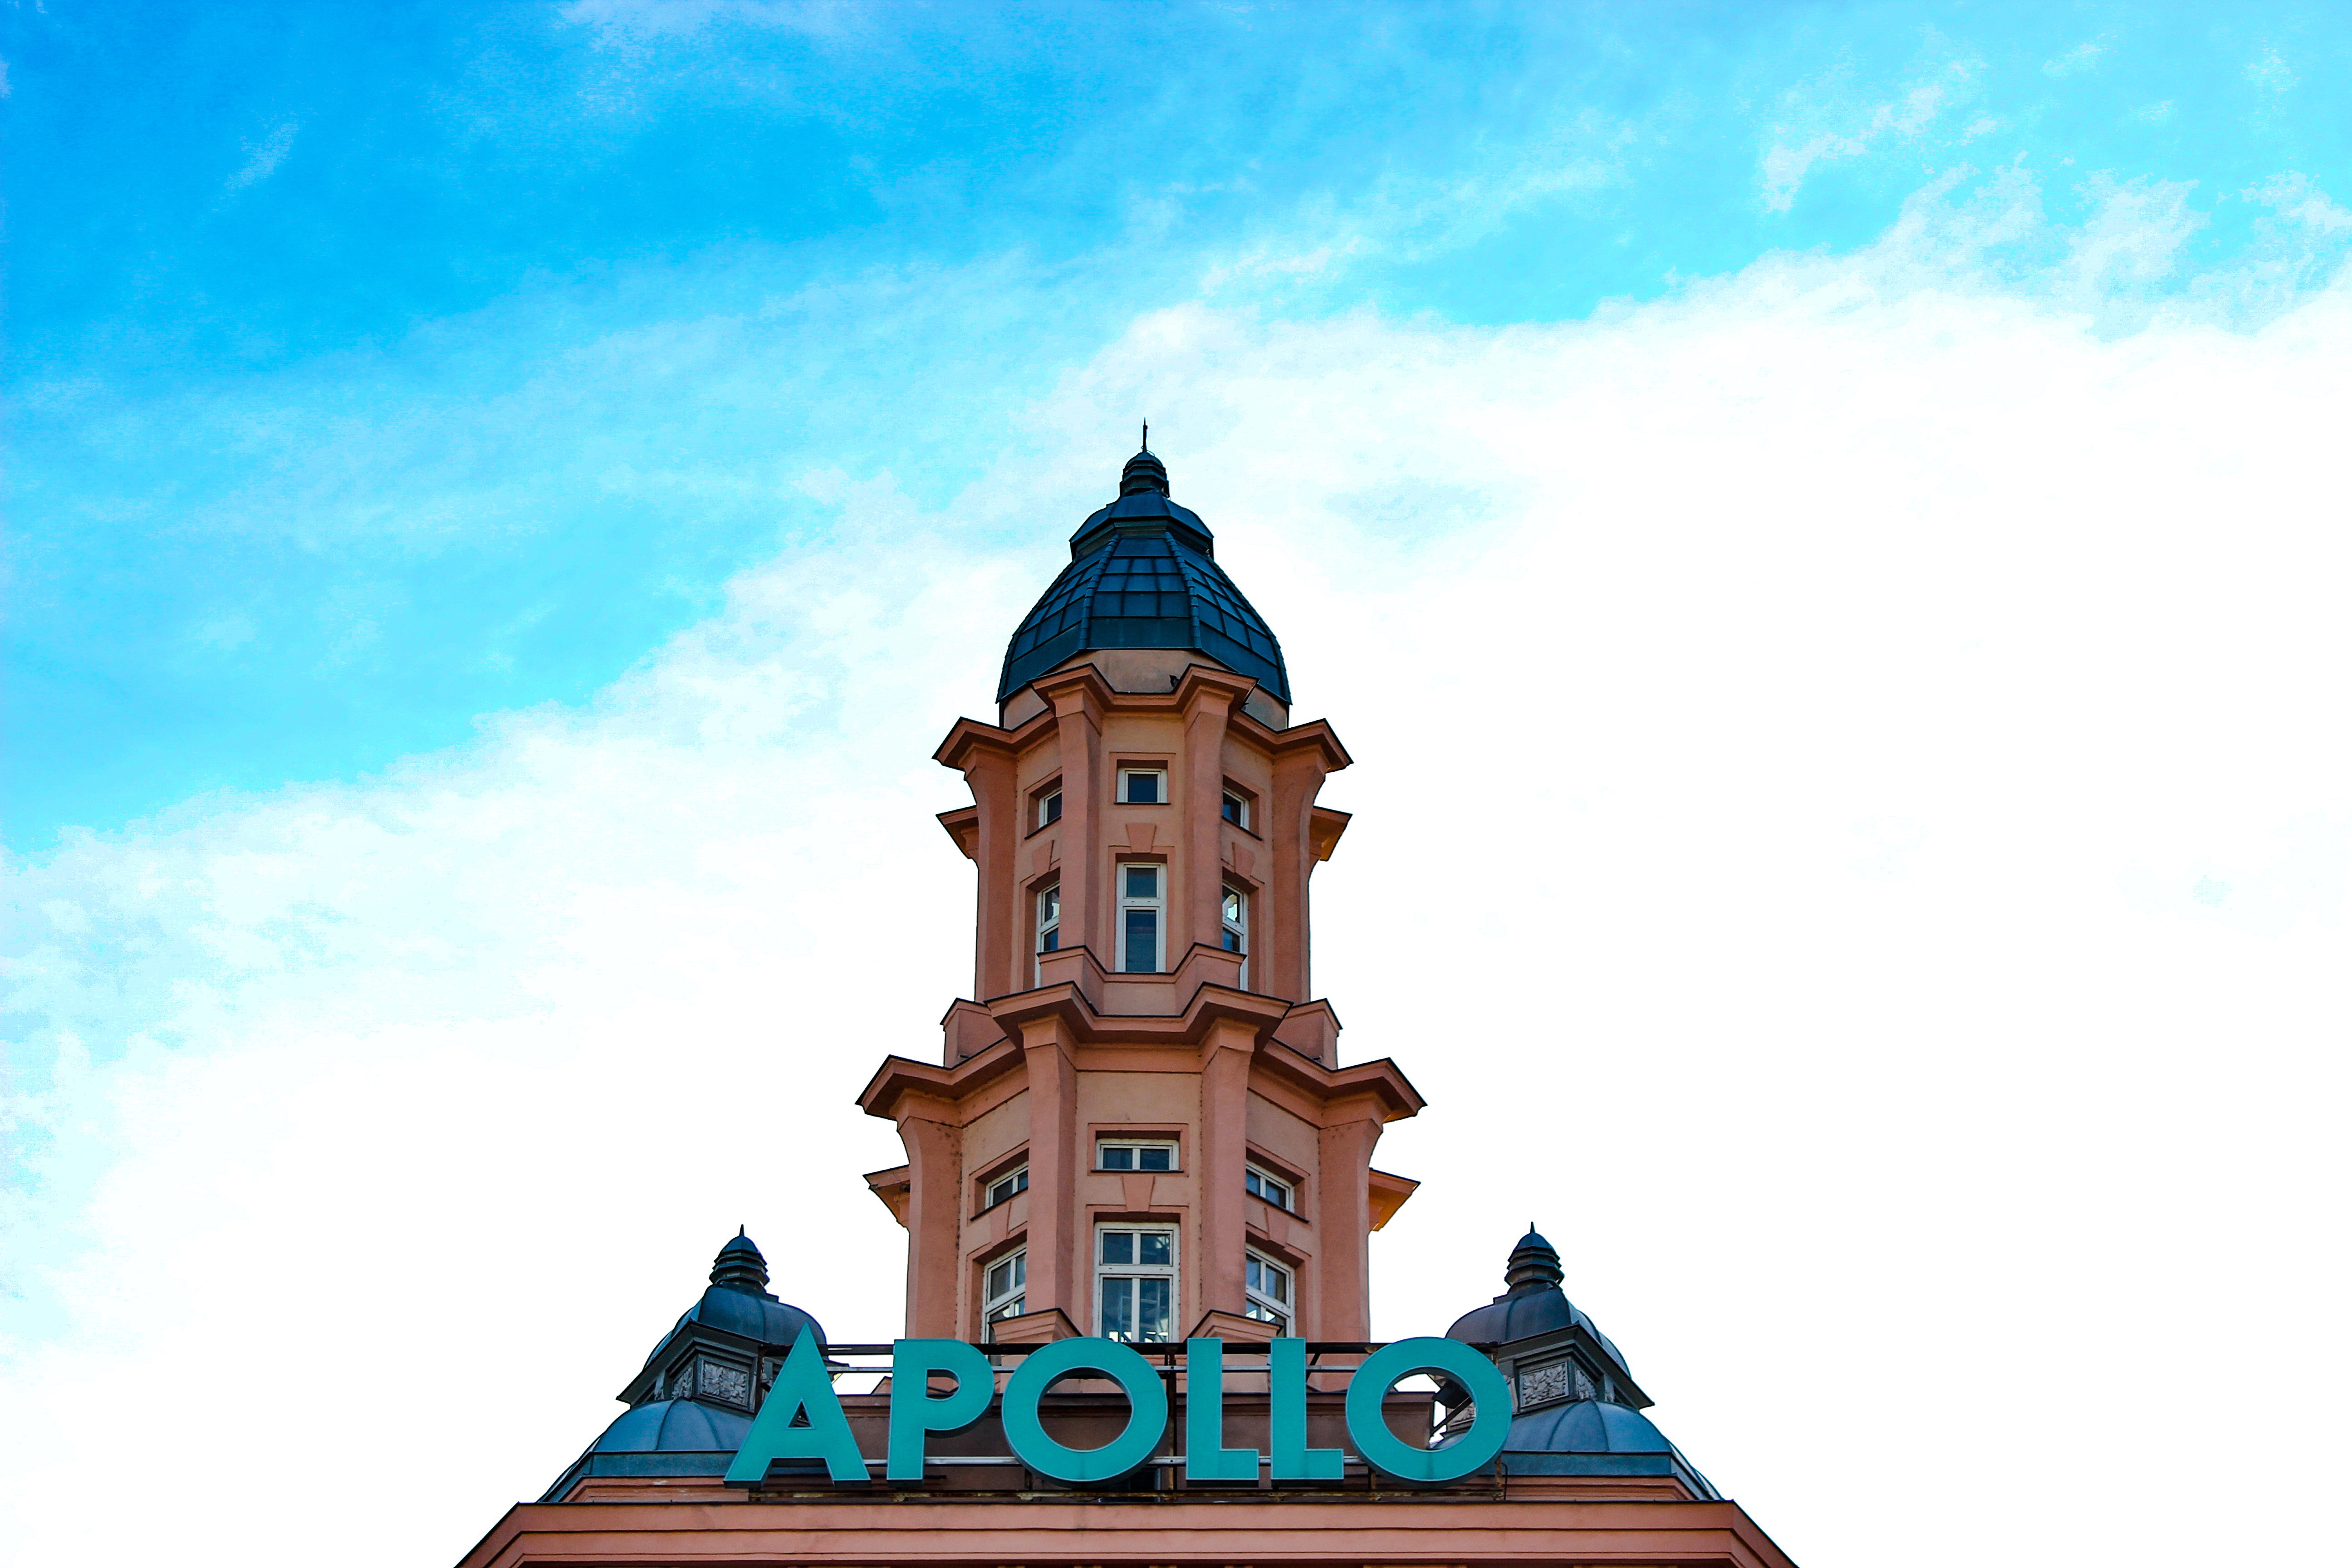 Building Architecture Vienna Blue Apollo Rooftops Cyan 5184x3456